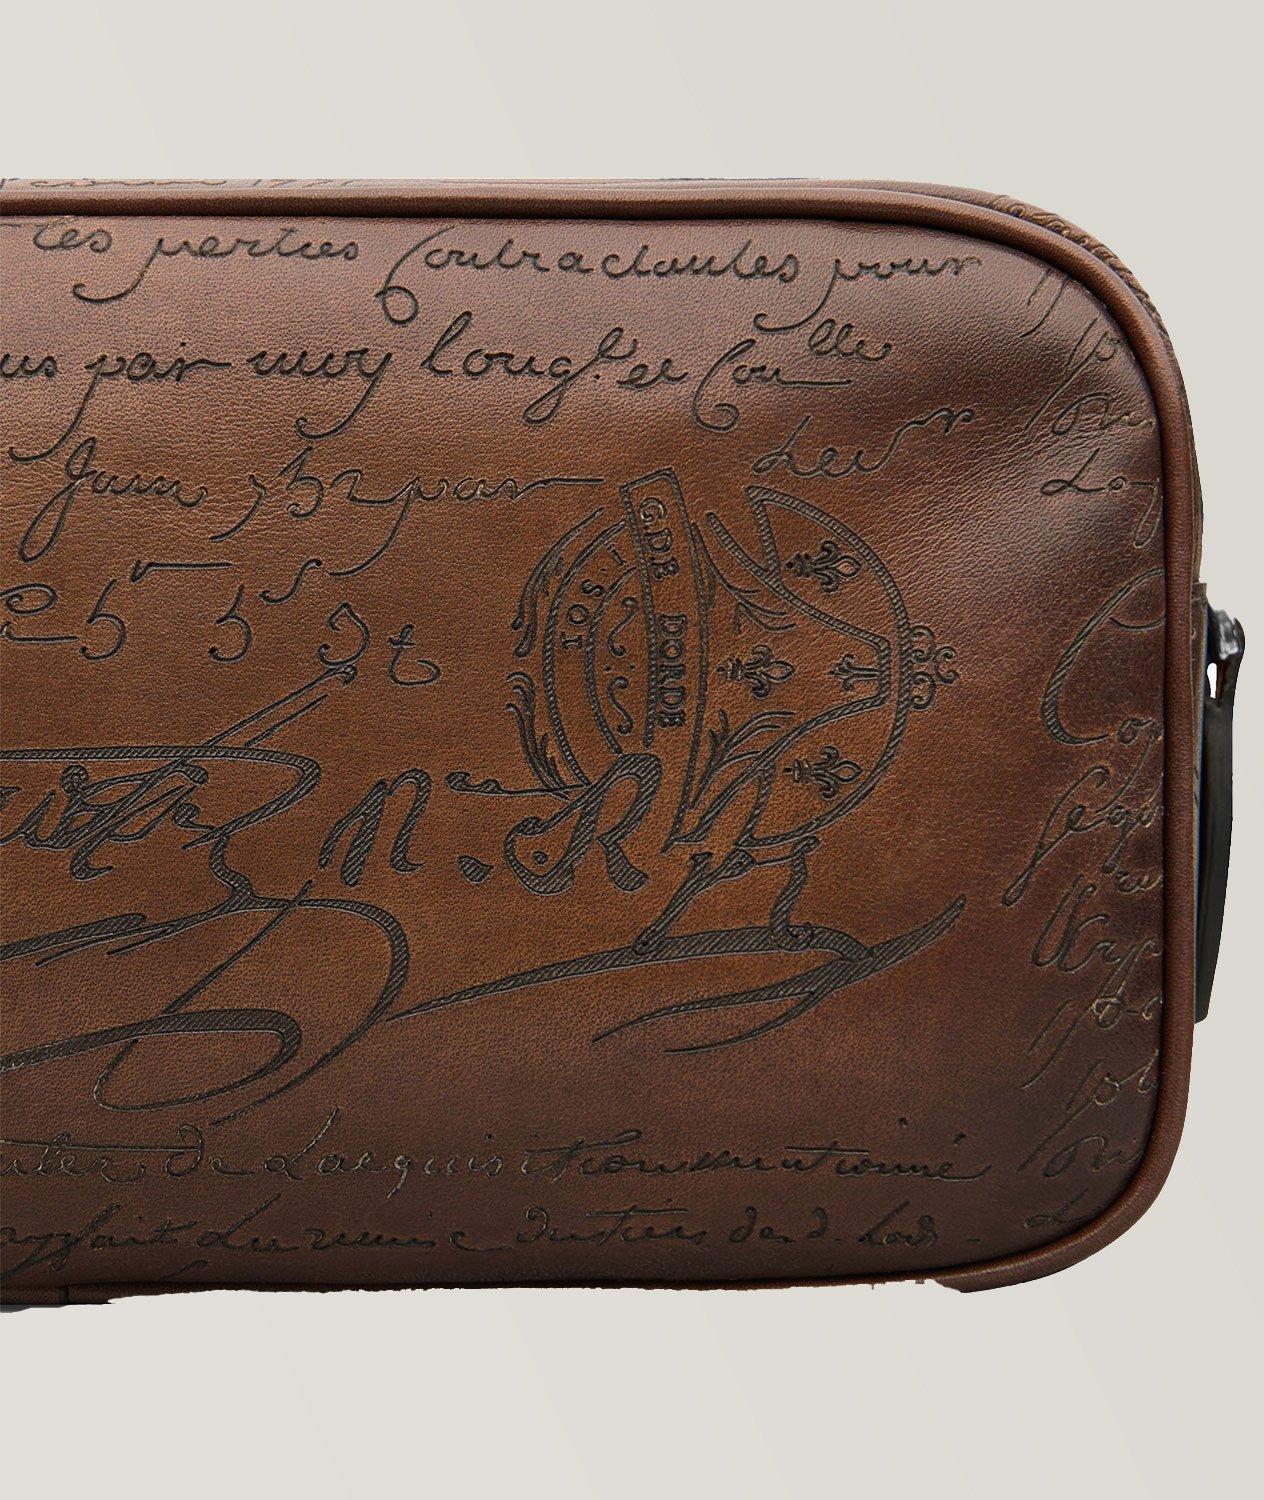 Formula Scritto Leather Toiletry Bag image 4